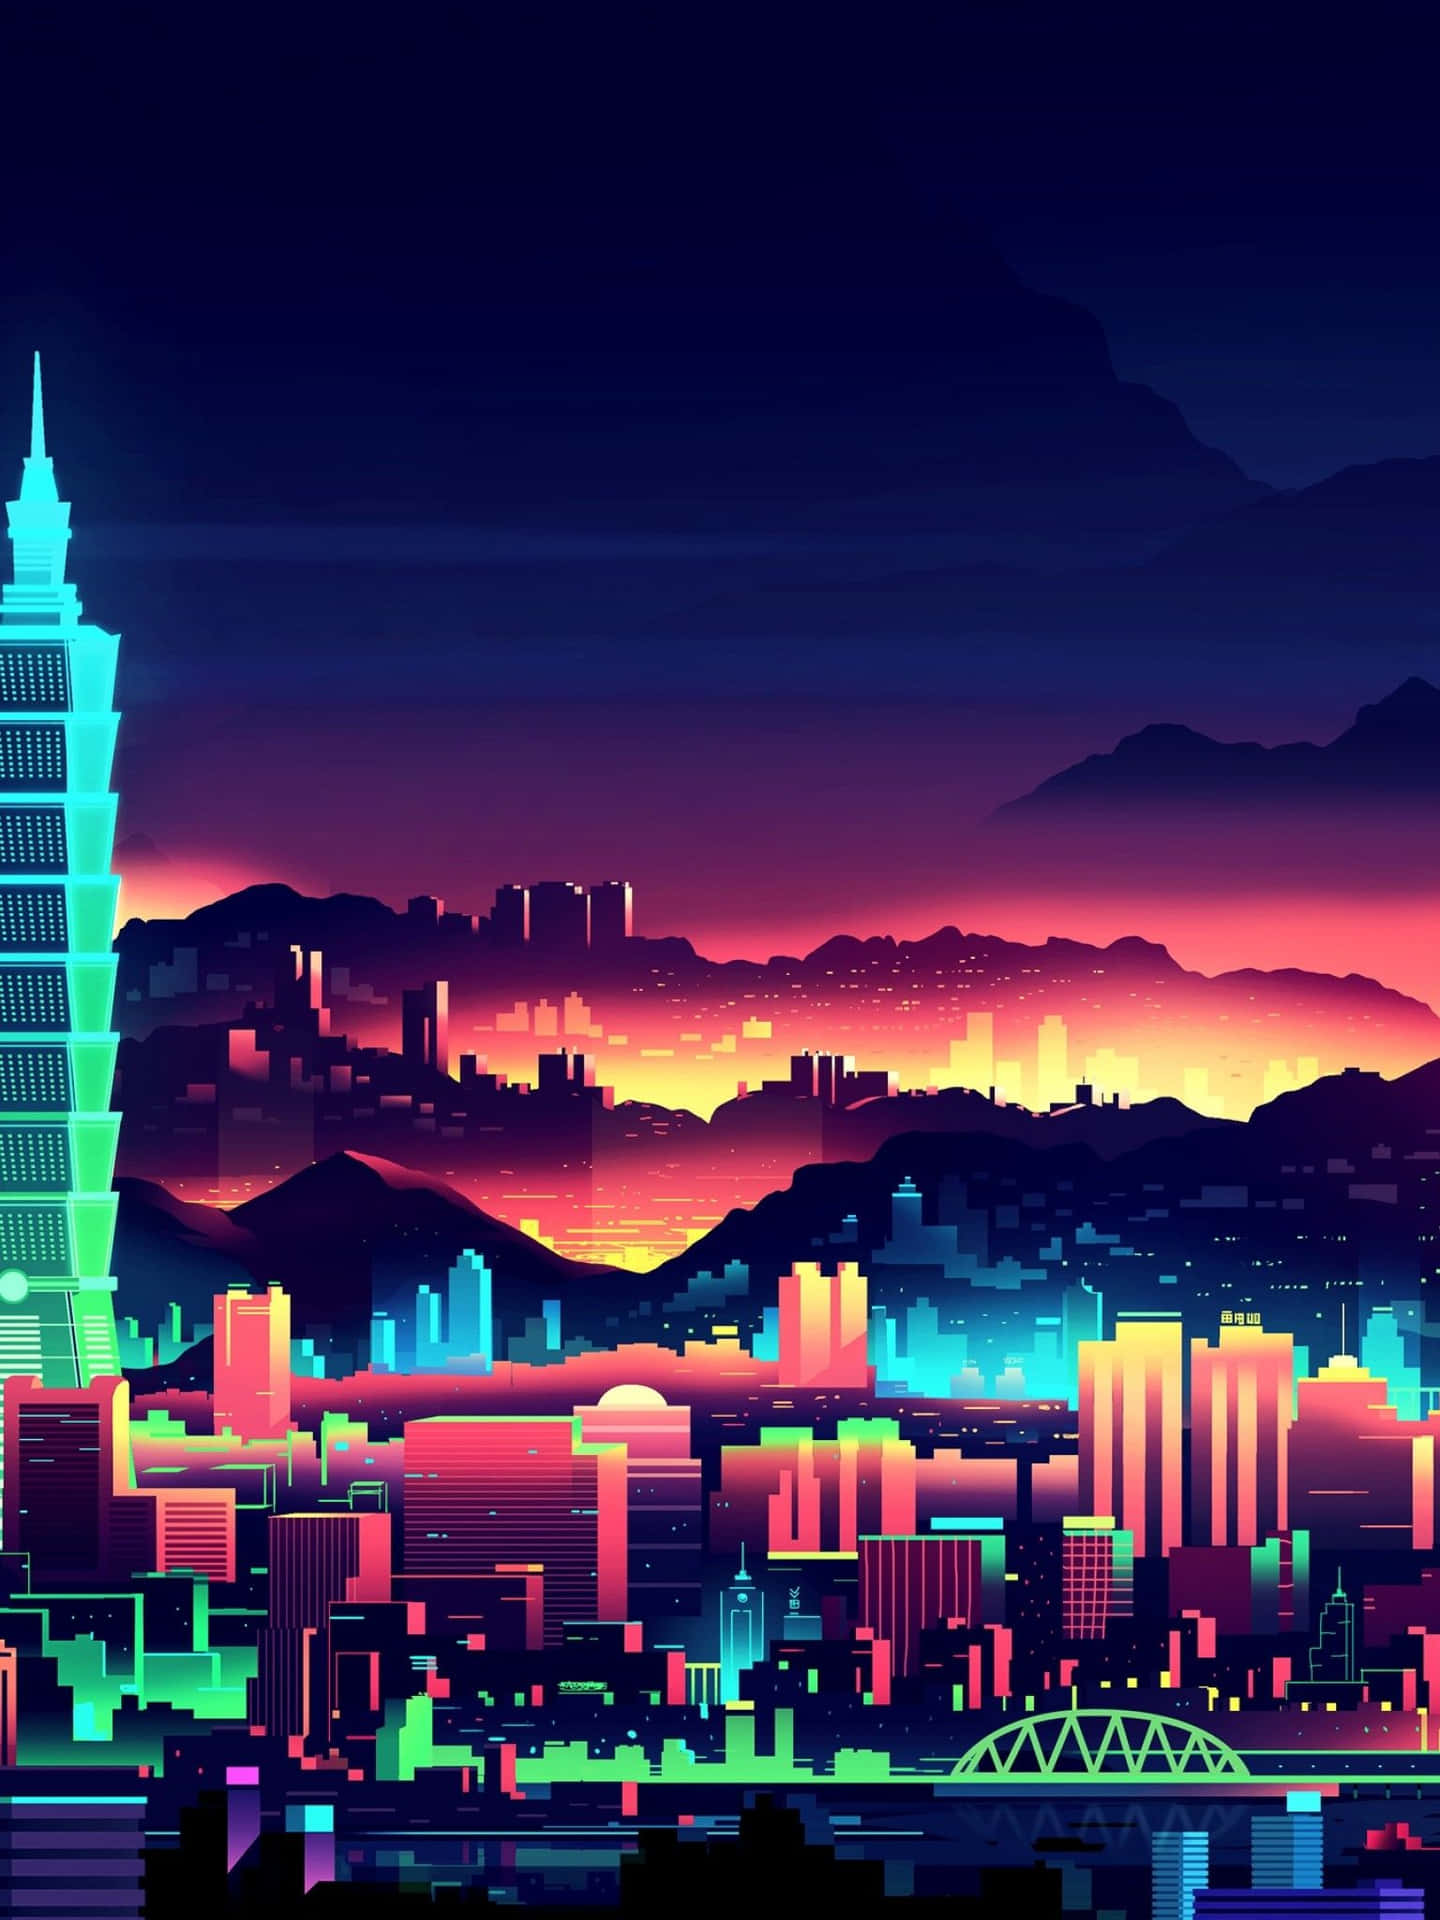 Be mesmerised by the dazzling lights of Neon City